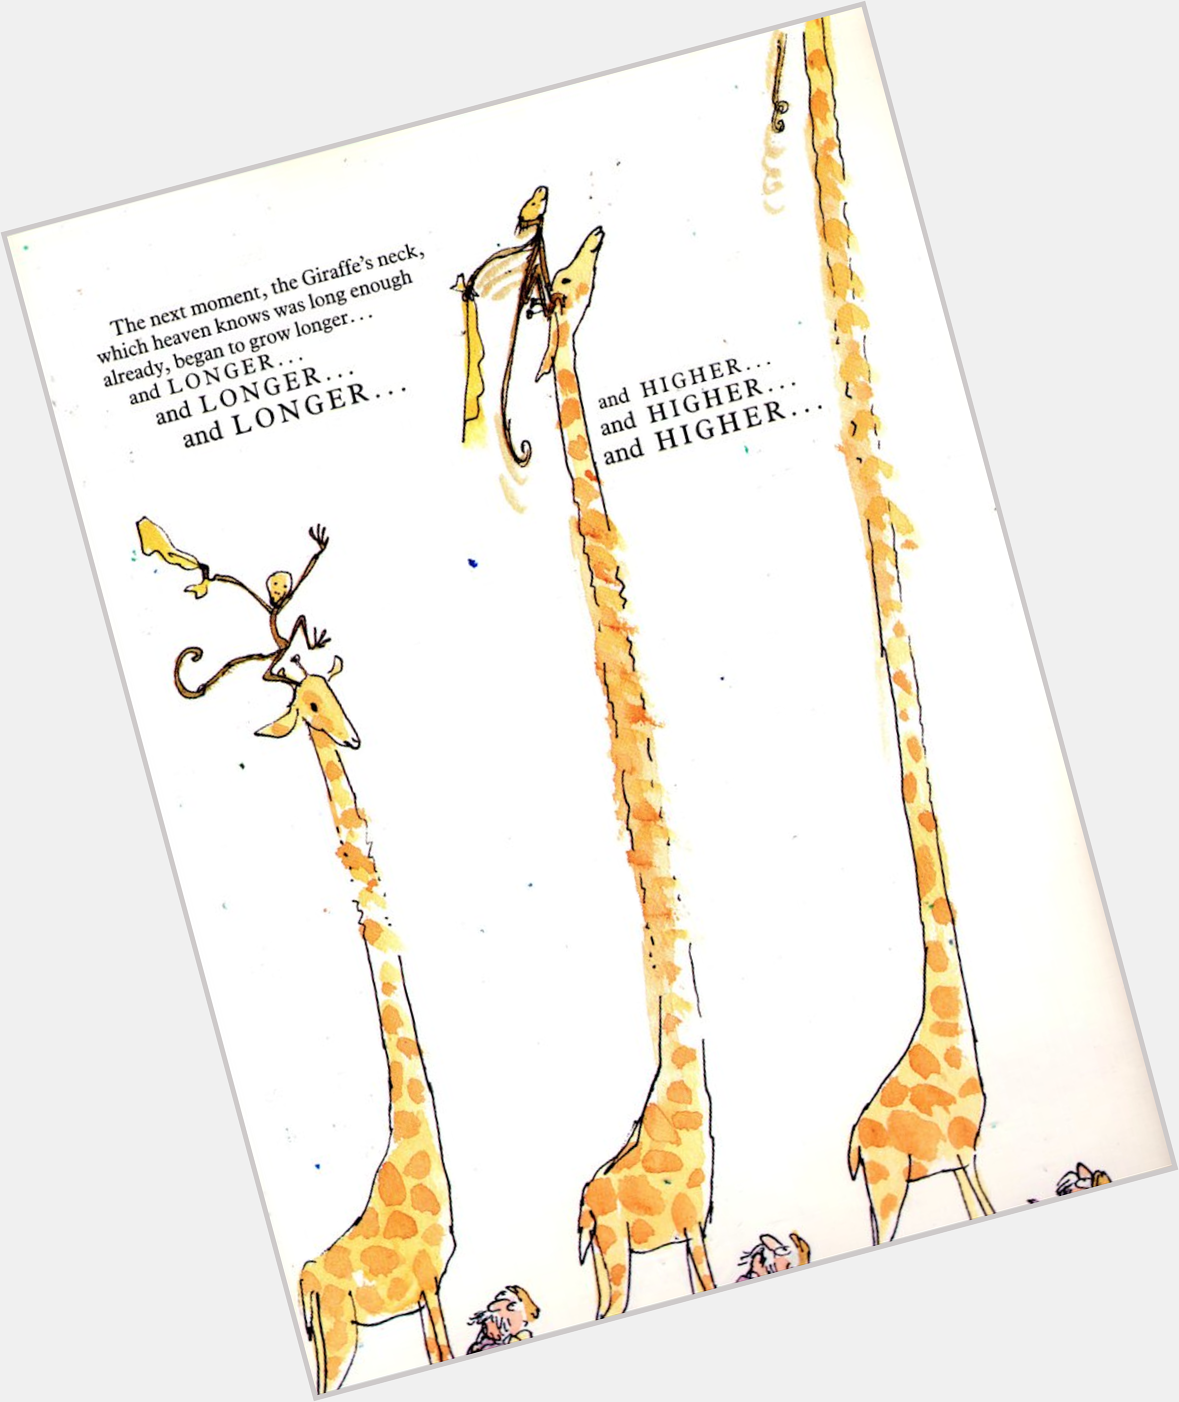 . Happy Sir Quentin Blake! Favourite ALL of "The Giraffe, the Pelly and Me"! 